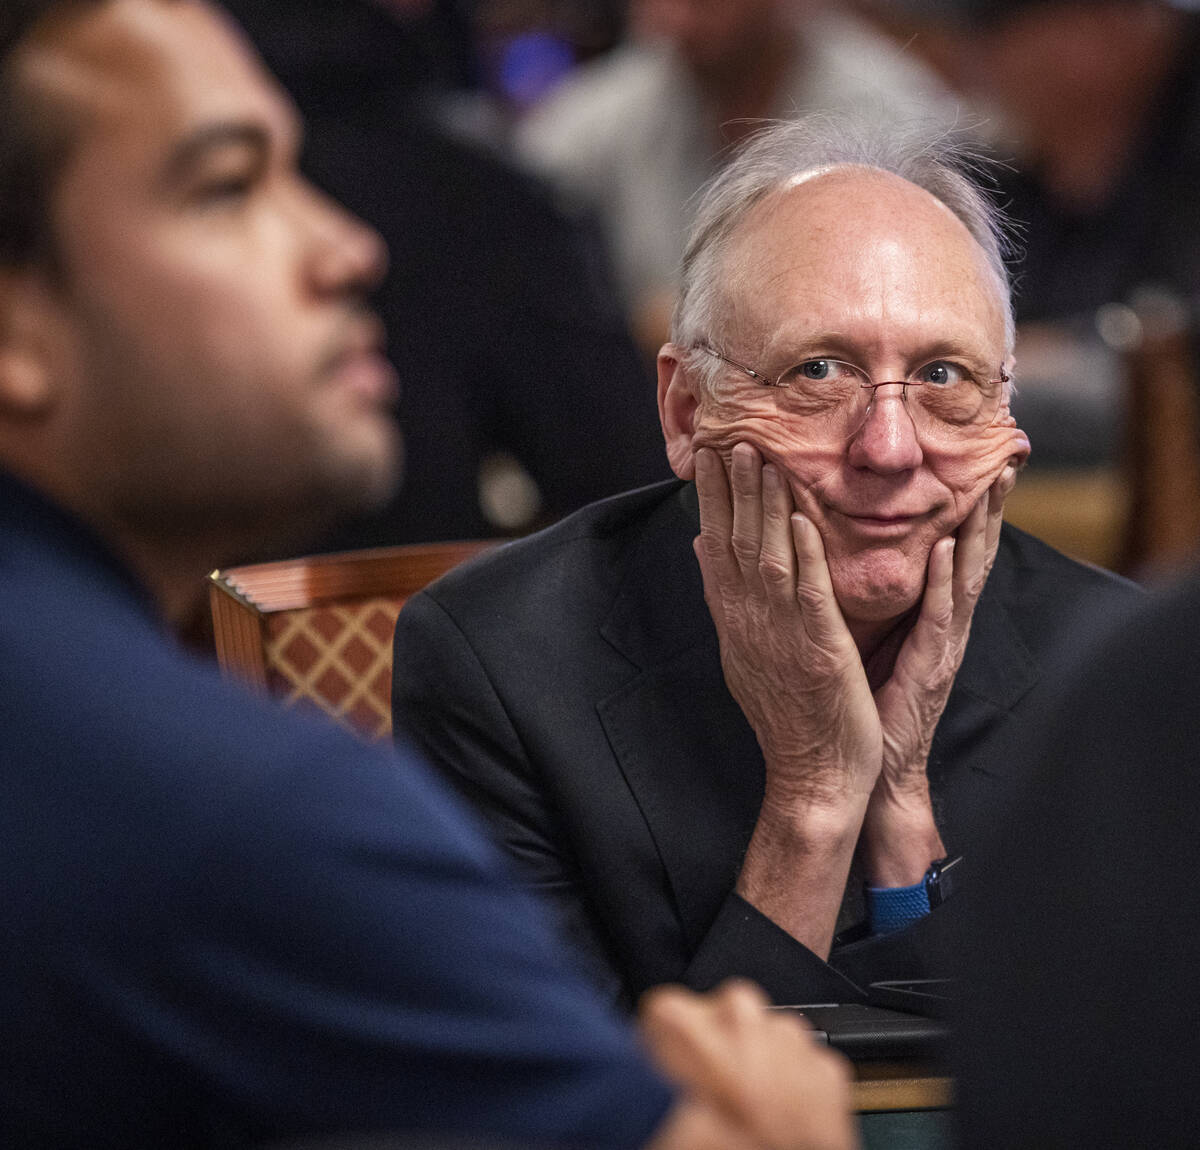 A player looks on as others bet a hand during Day 1A of the $10,000 buy-in Main Event at the Wo ...